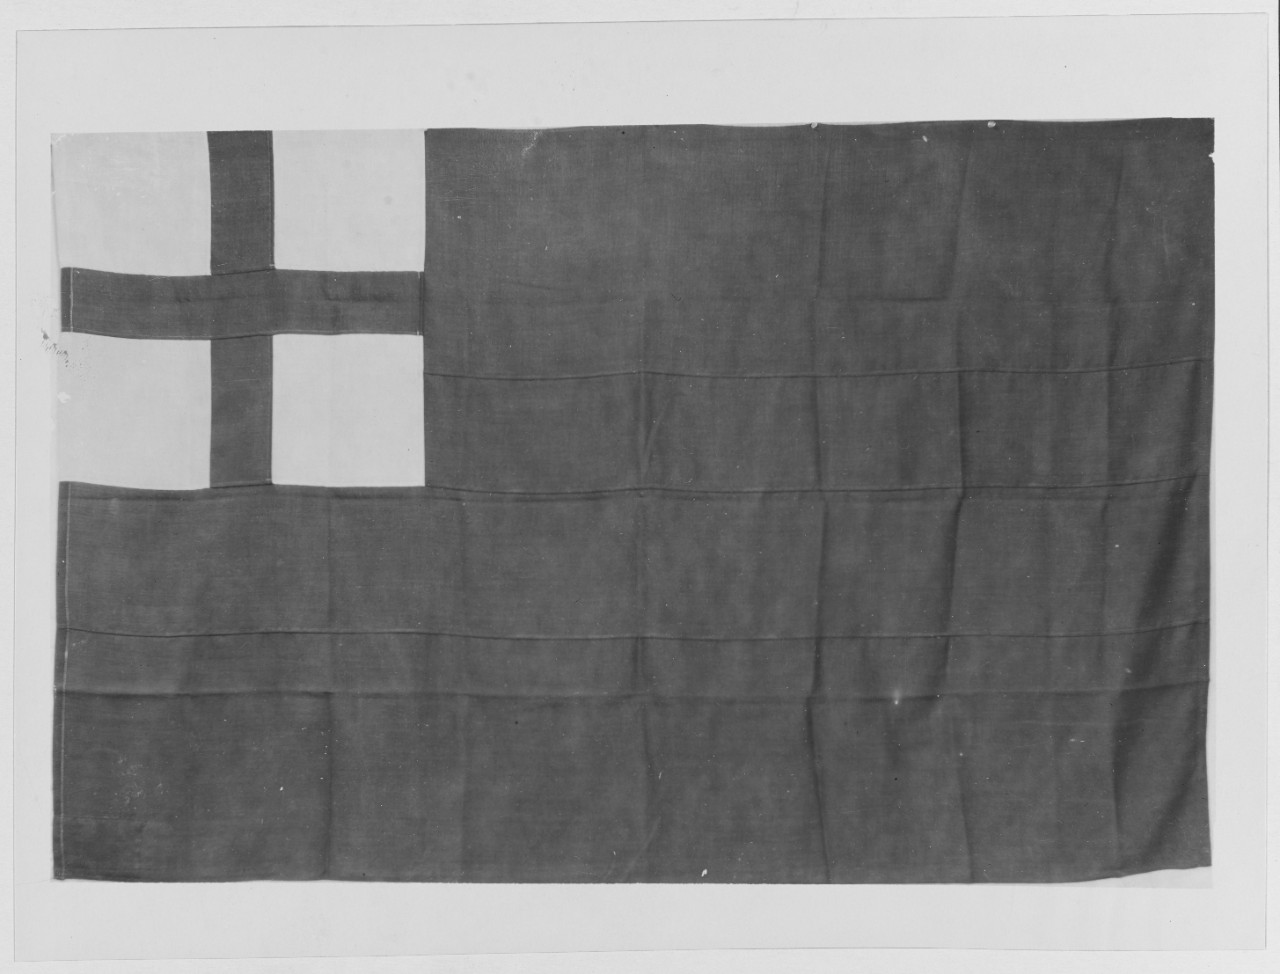 English Ensign, in 17th Century.